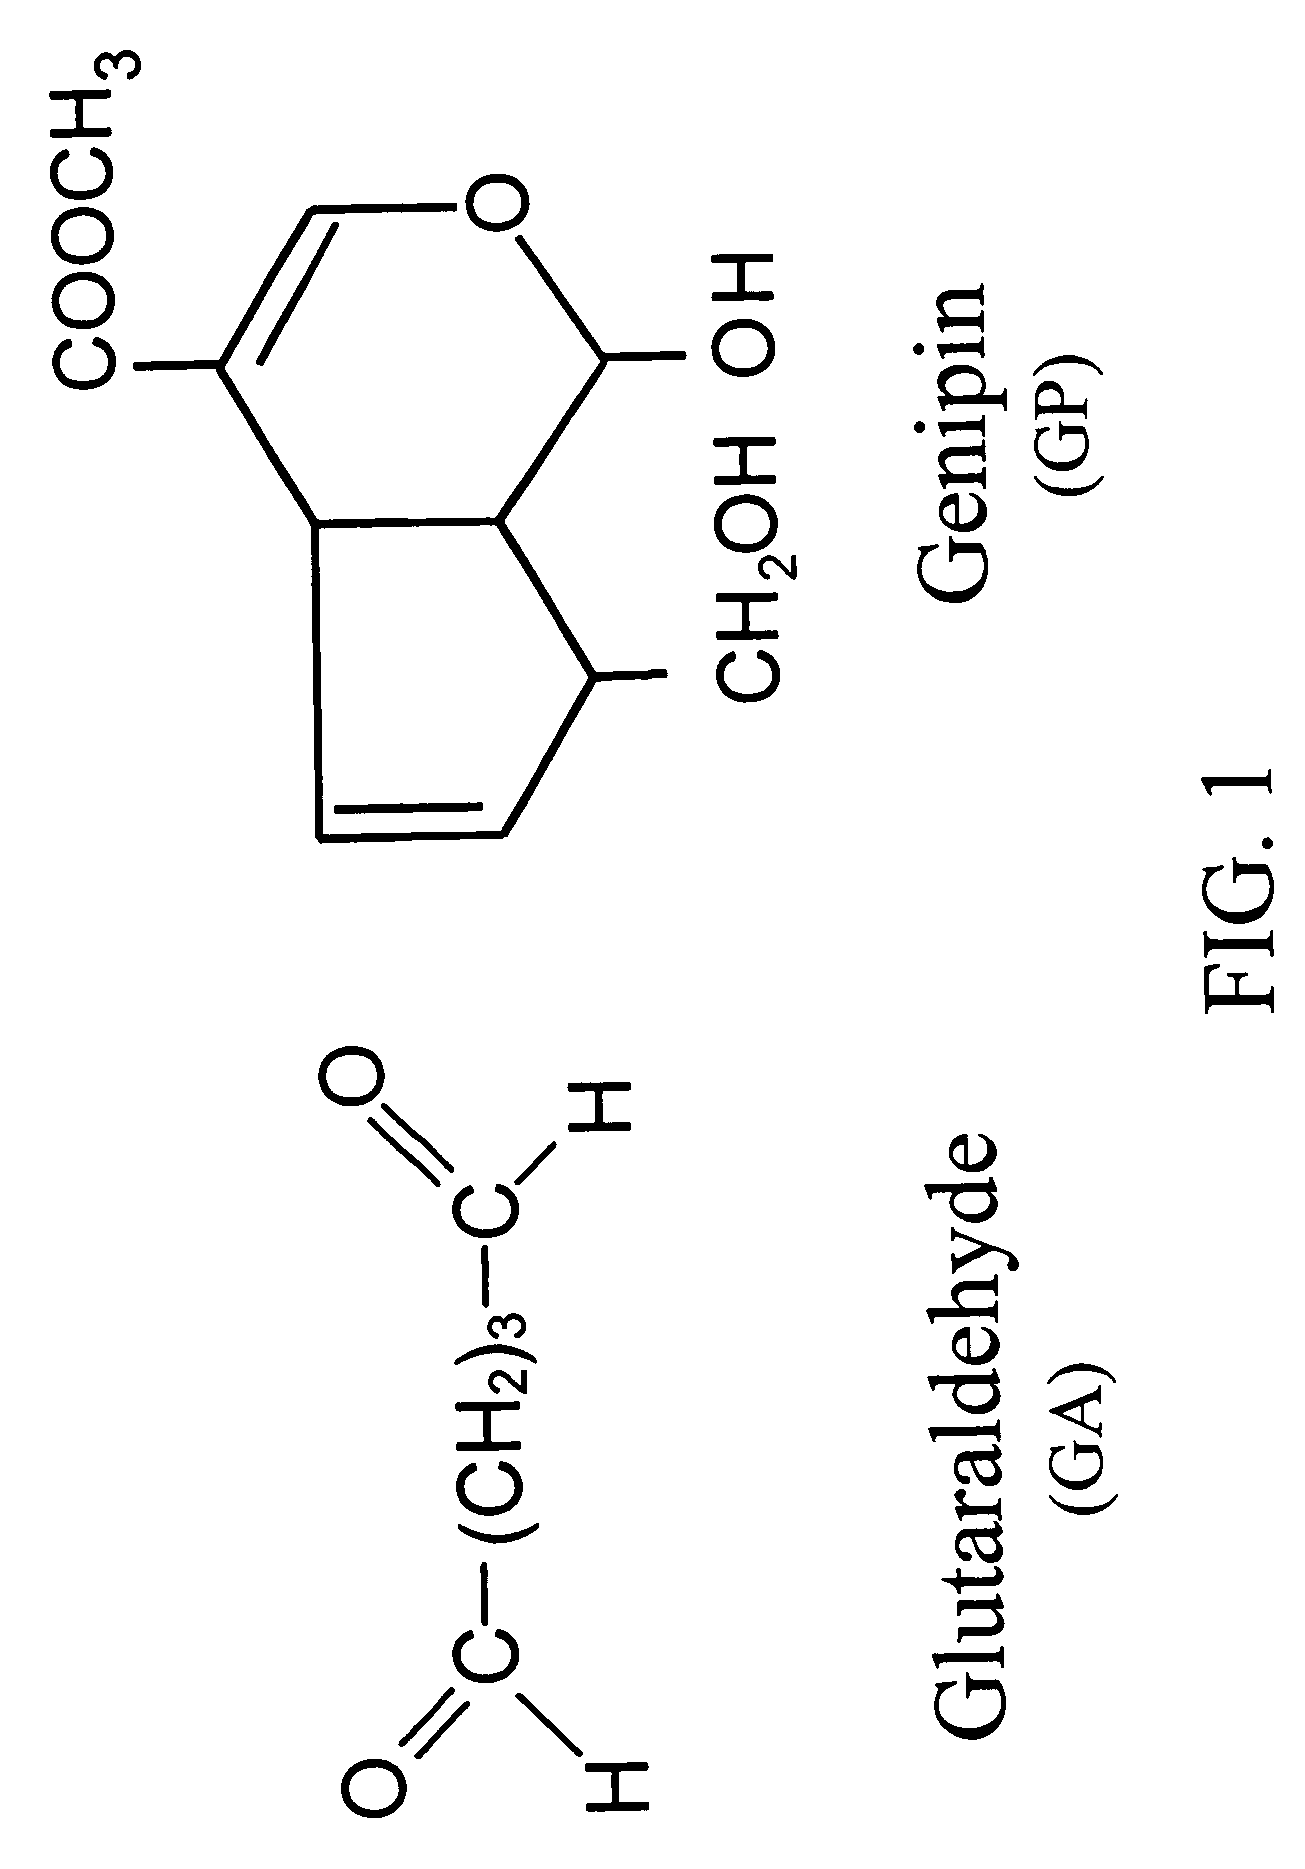 Crosslinkable biological material and medical uses